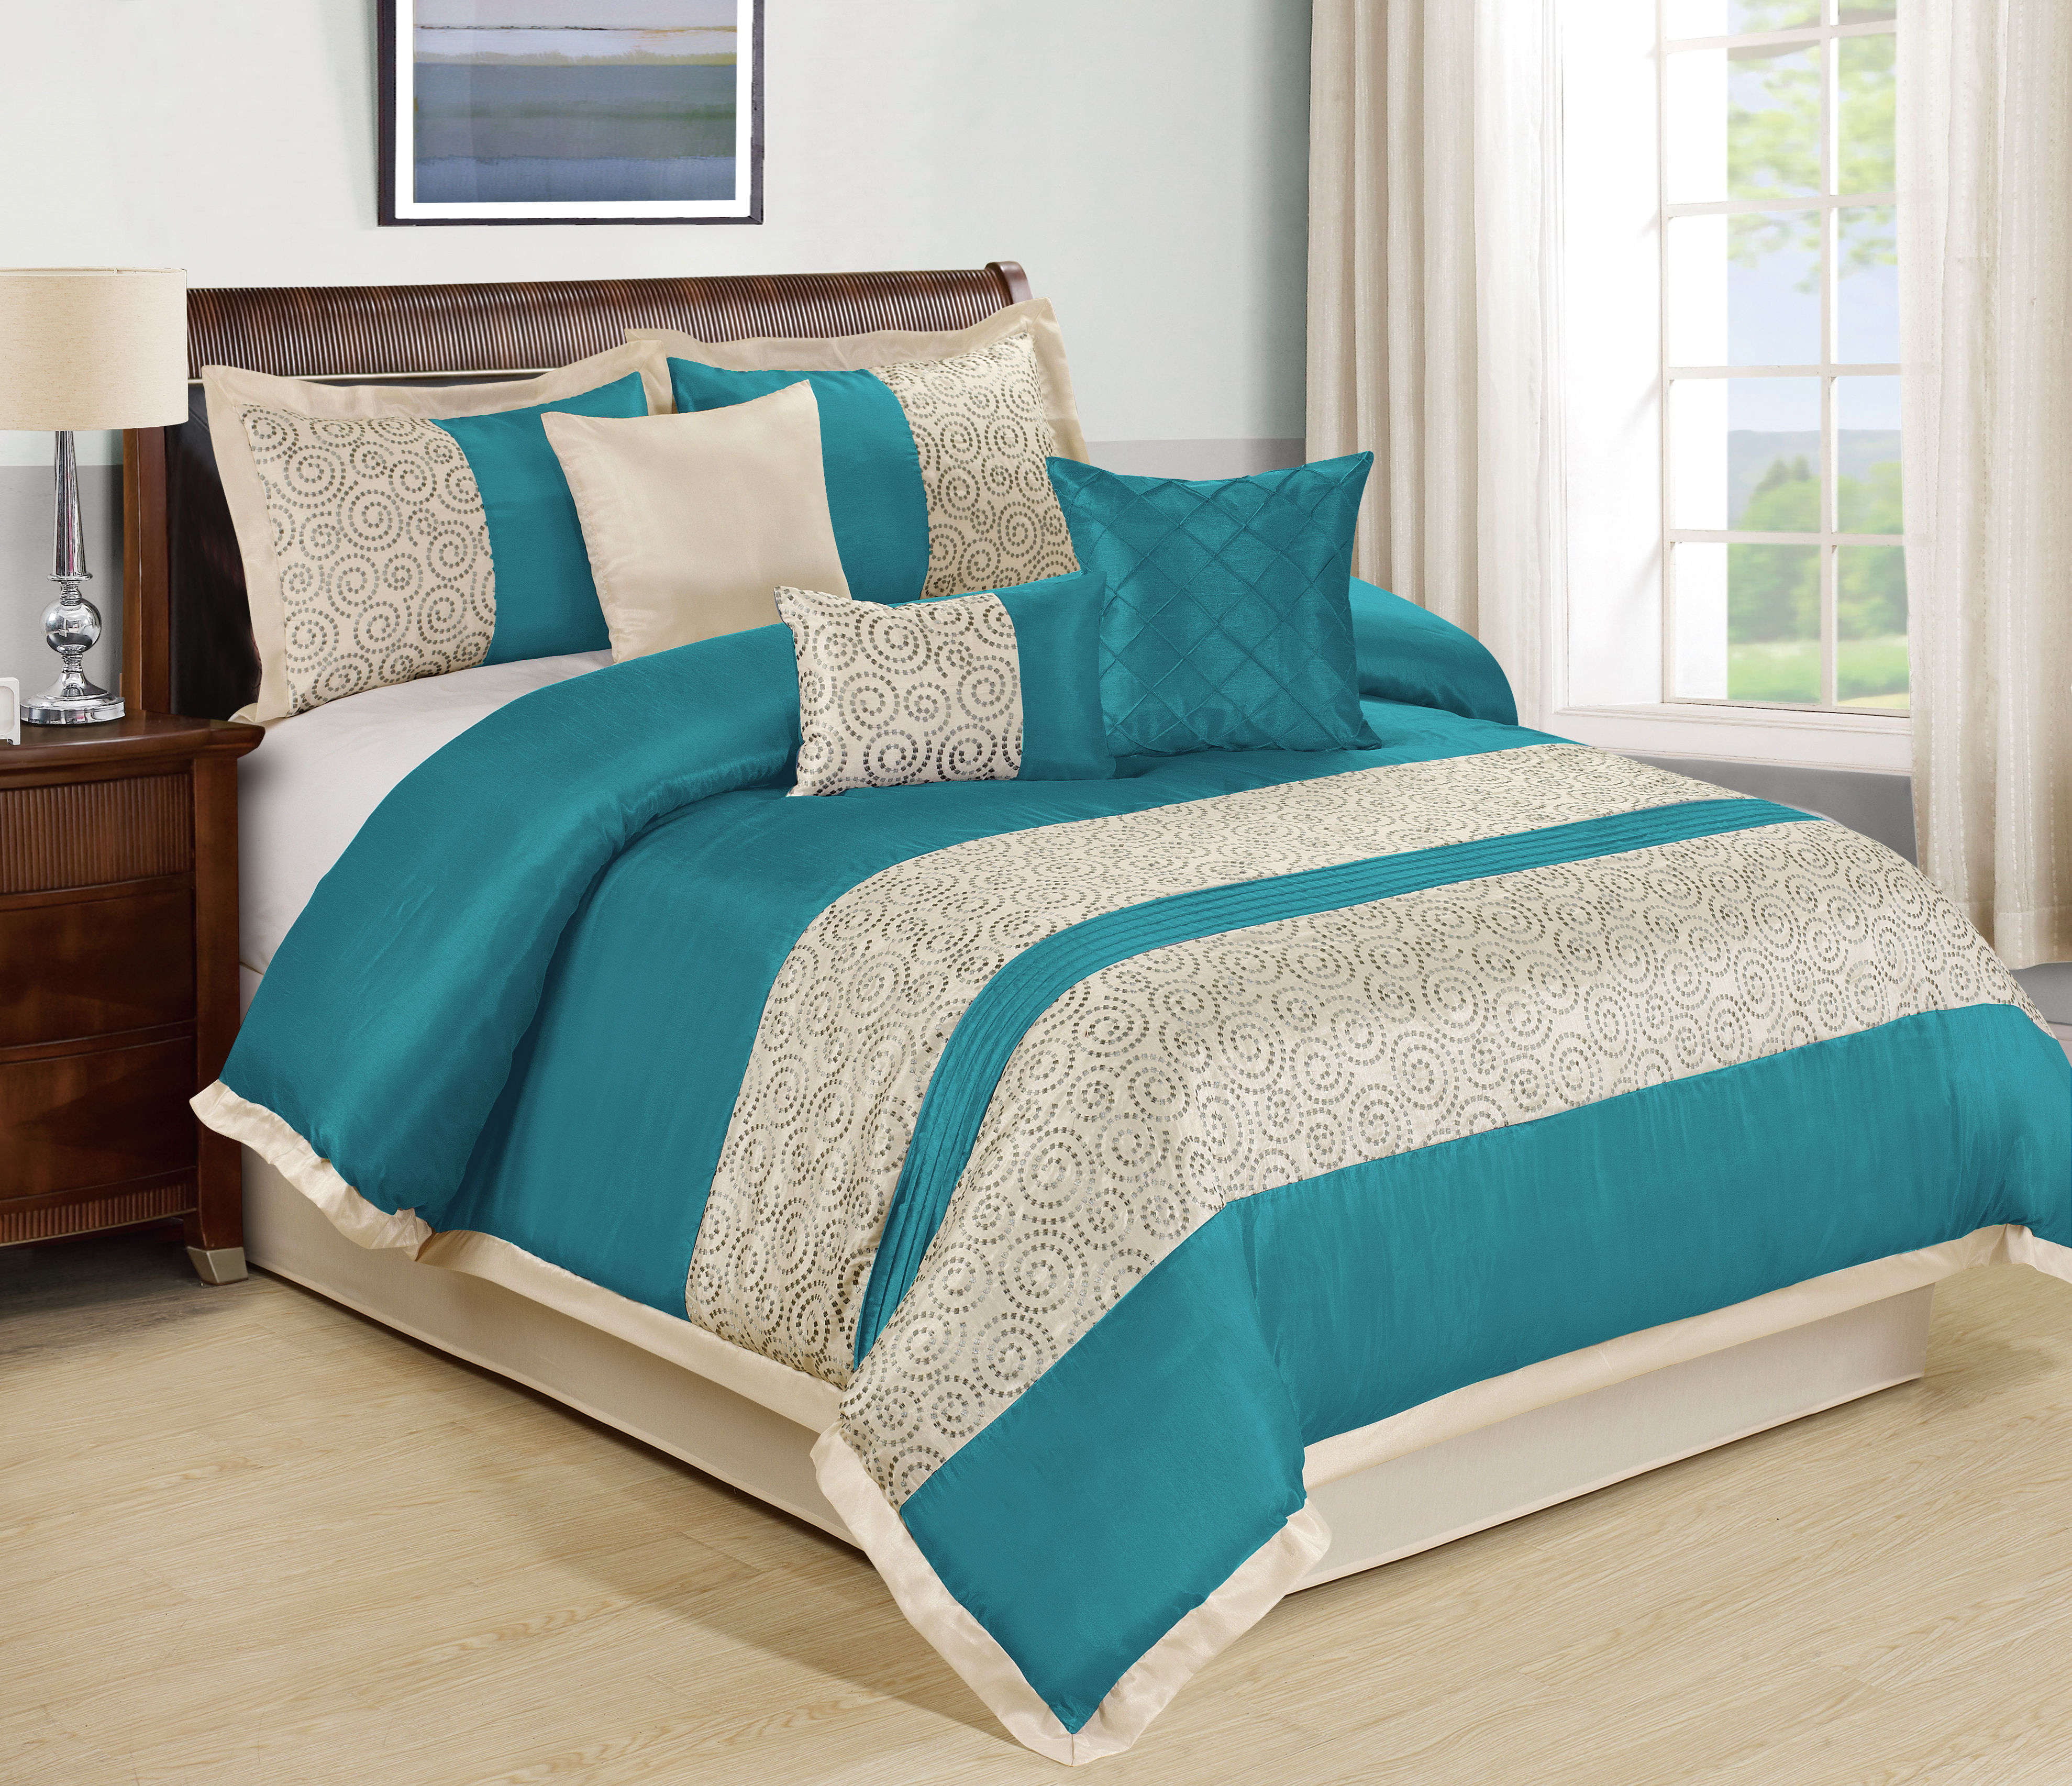 Wt Piece Faux Silk Fabric Scroll Embroidery Comforter Set Teal Color